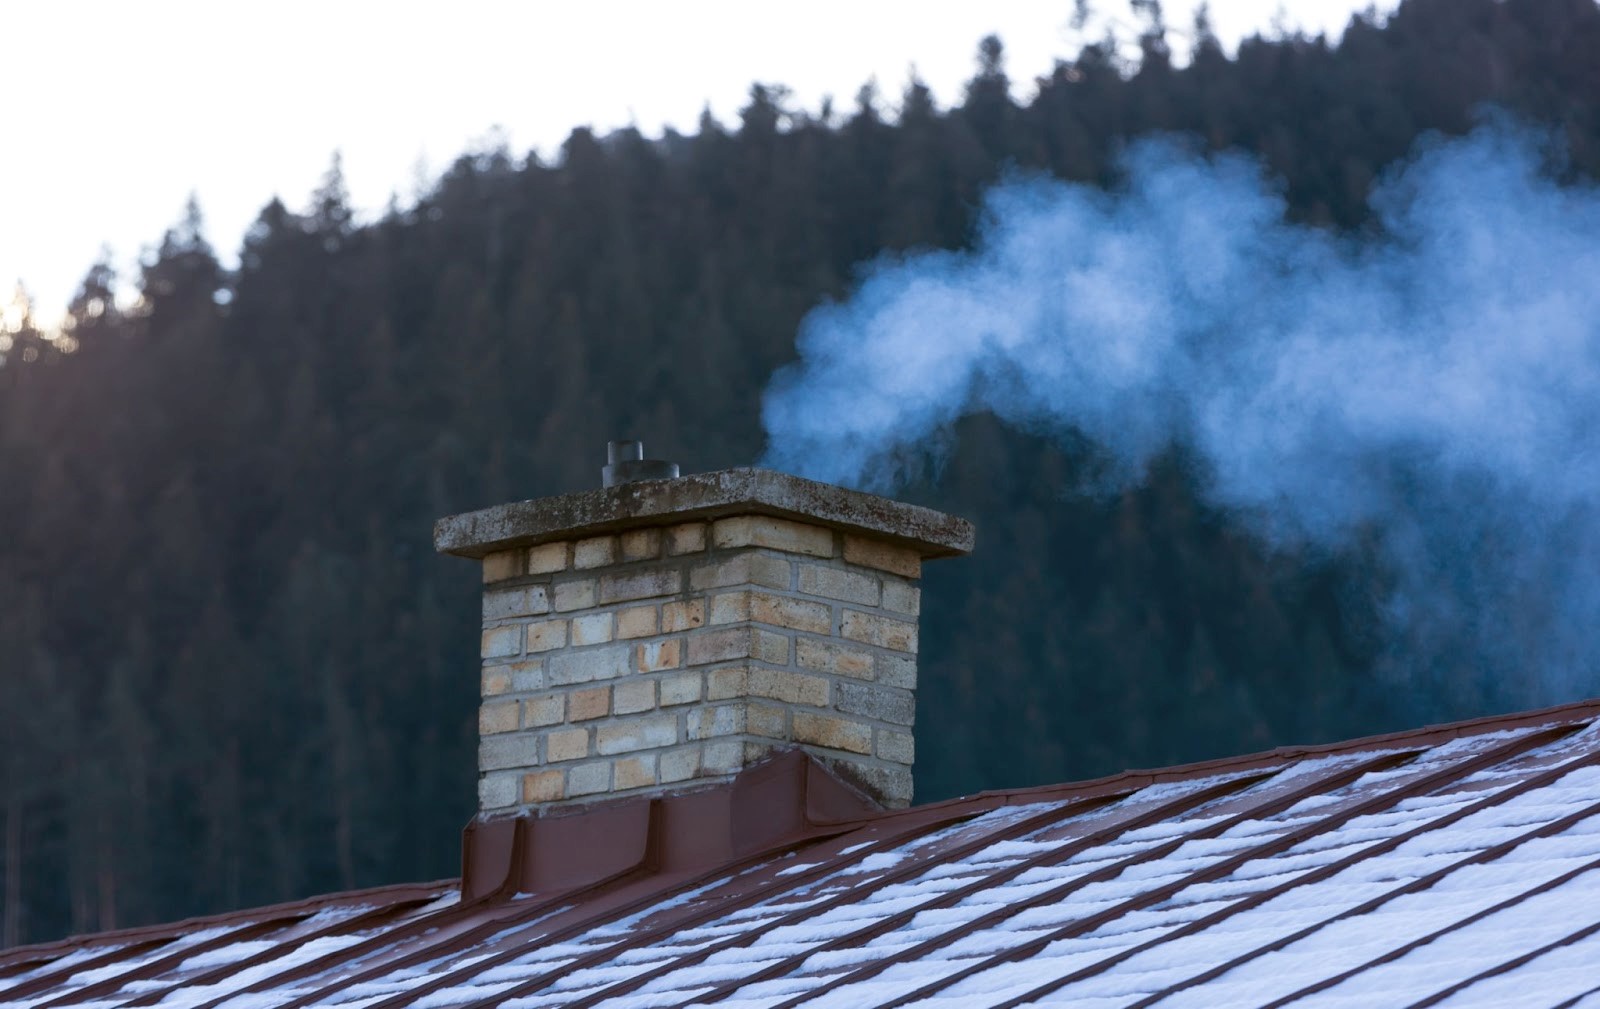 smoke from a chimney on the roof